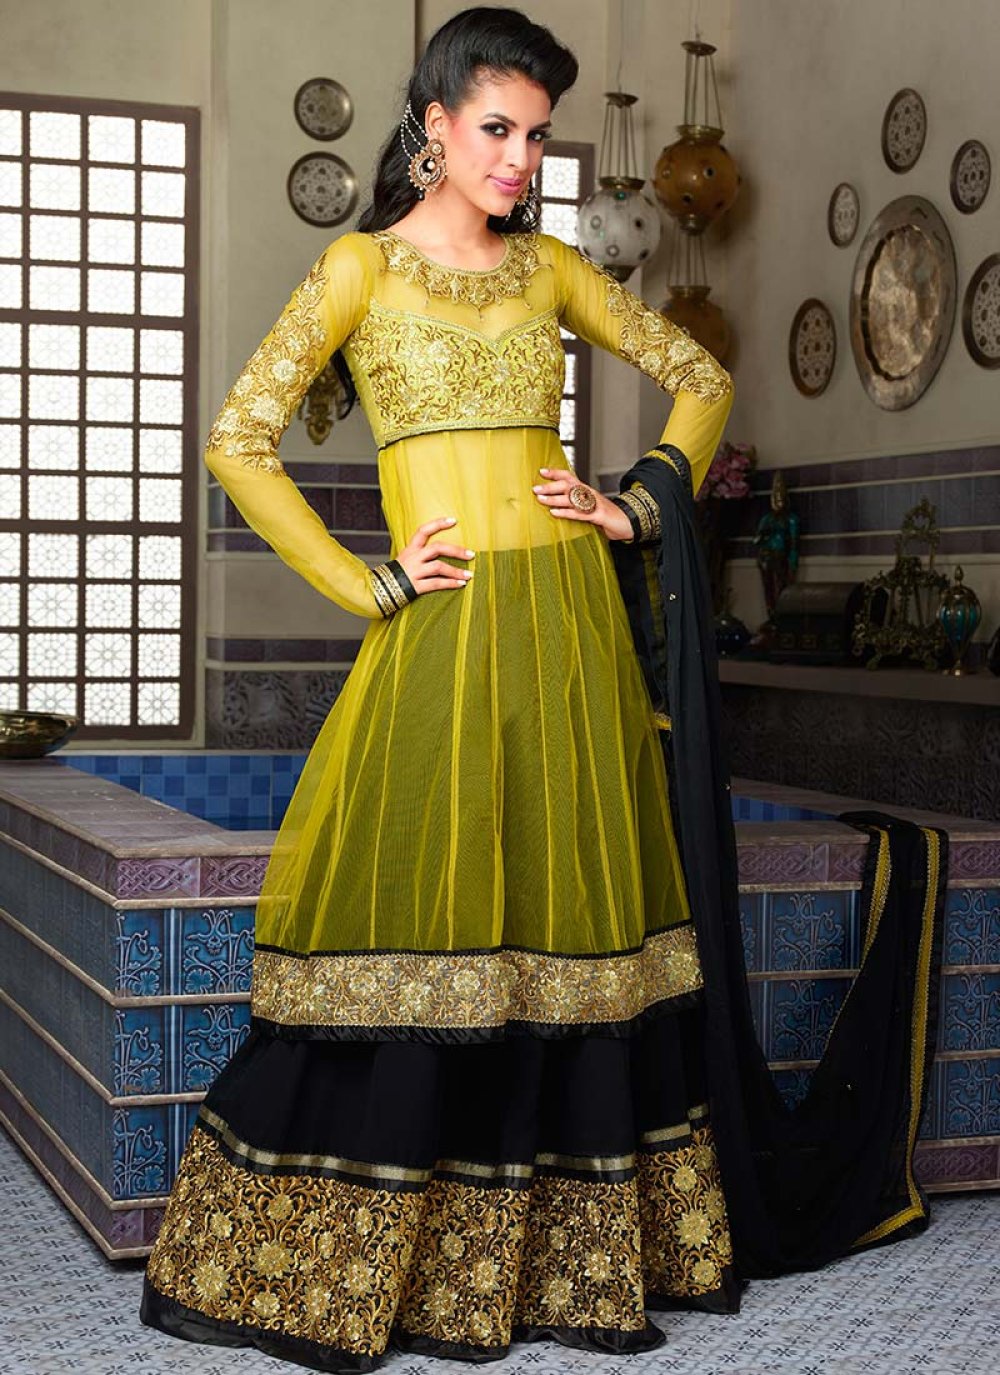 5 Ethnic Designs For Anarkali Suit To Look More Graceful - Latest Fashion  News, New Trends